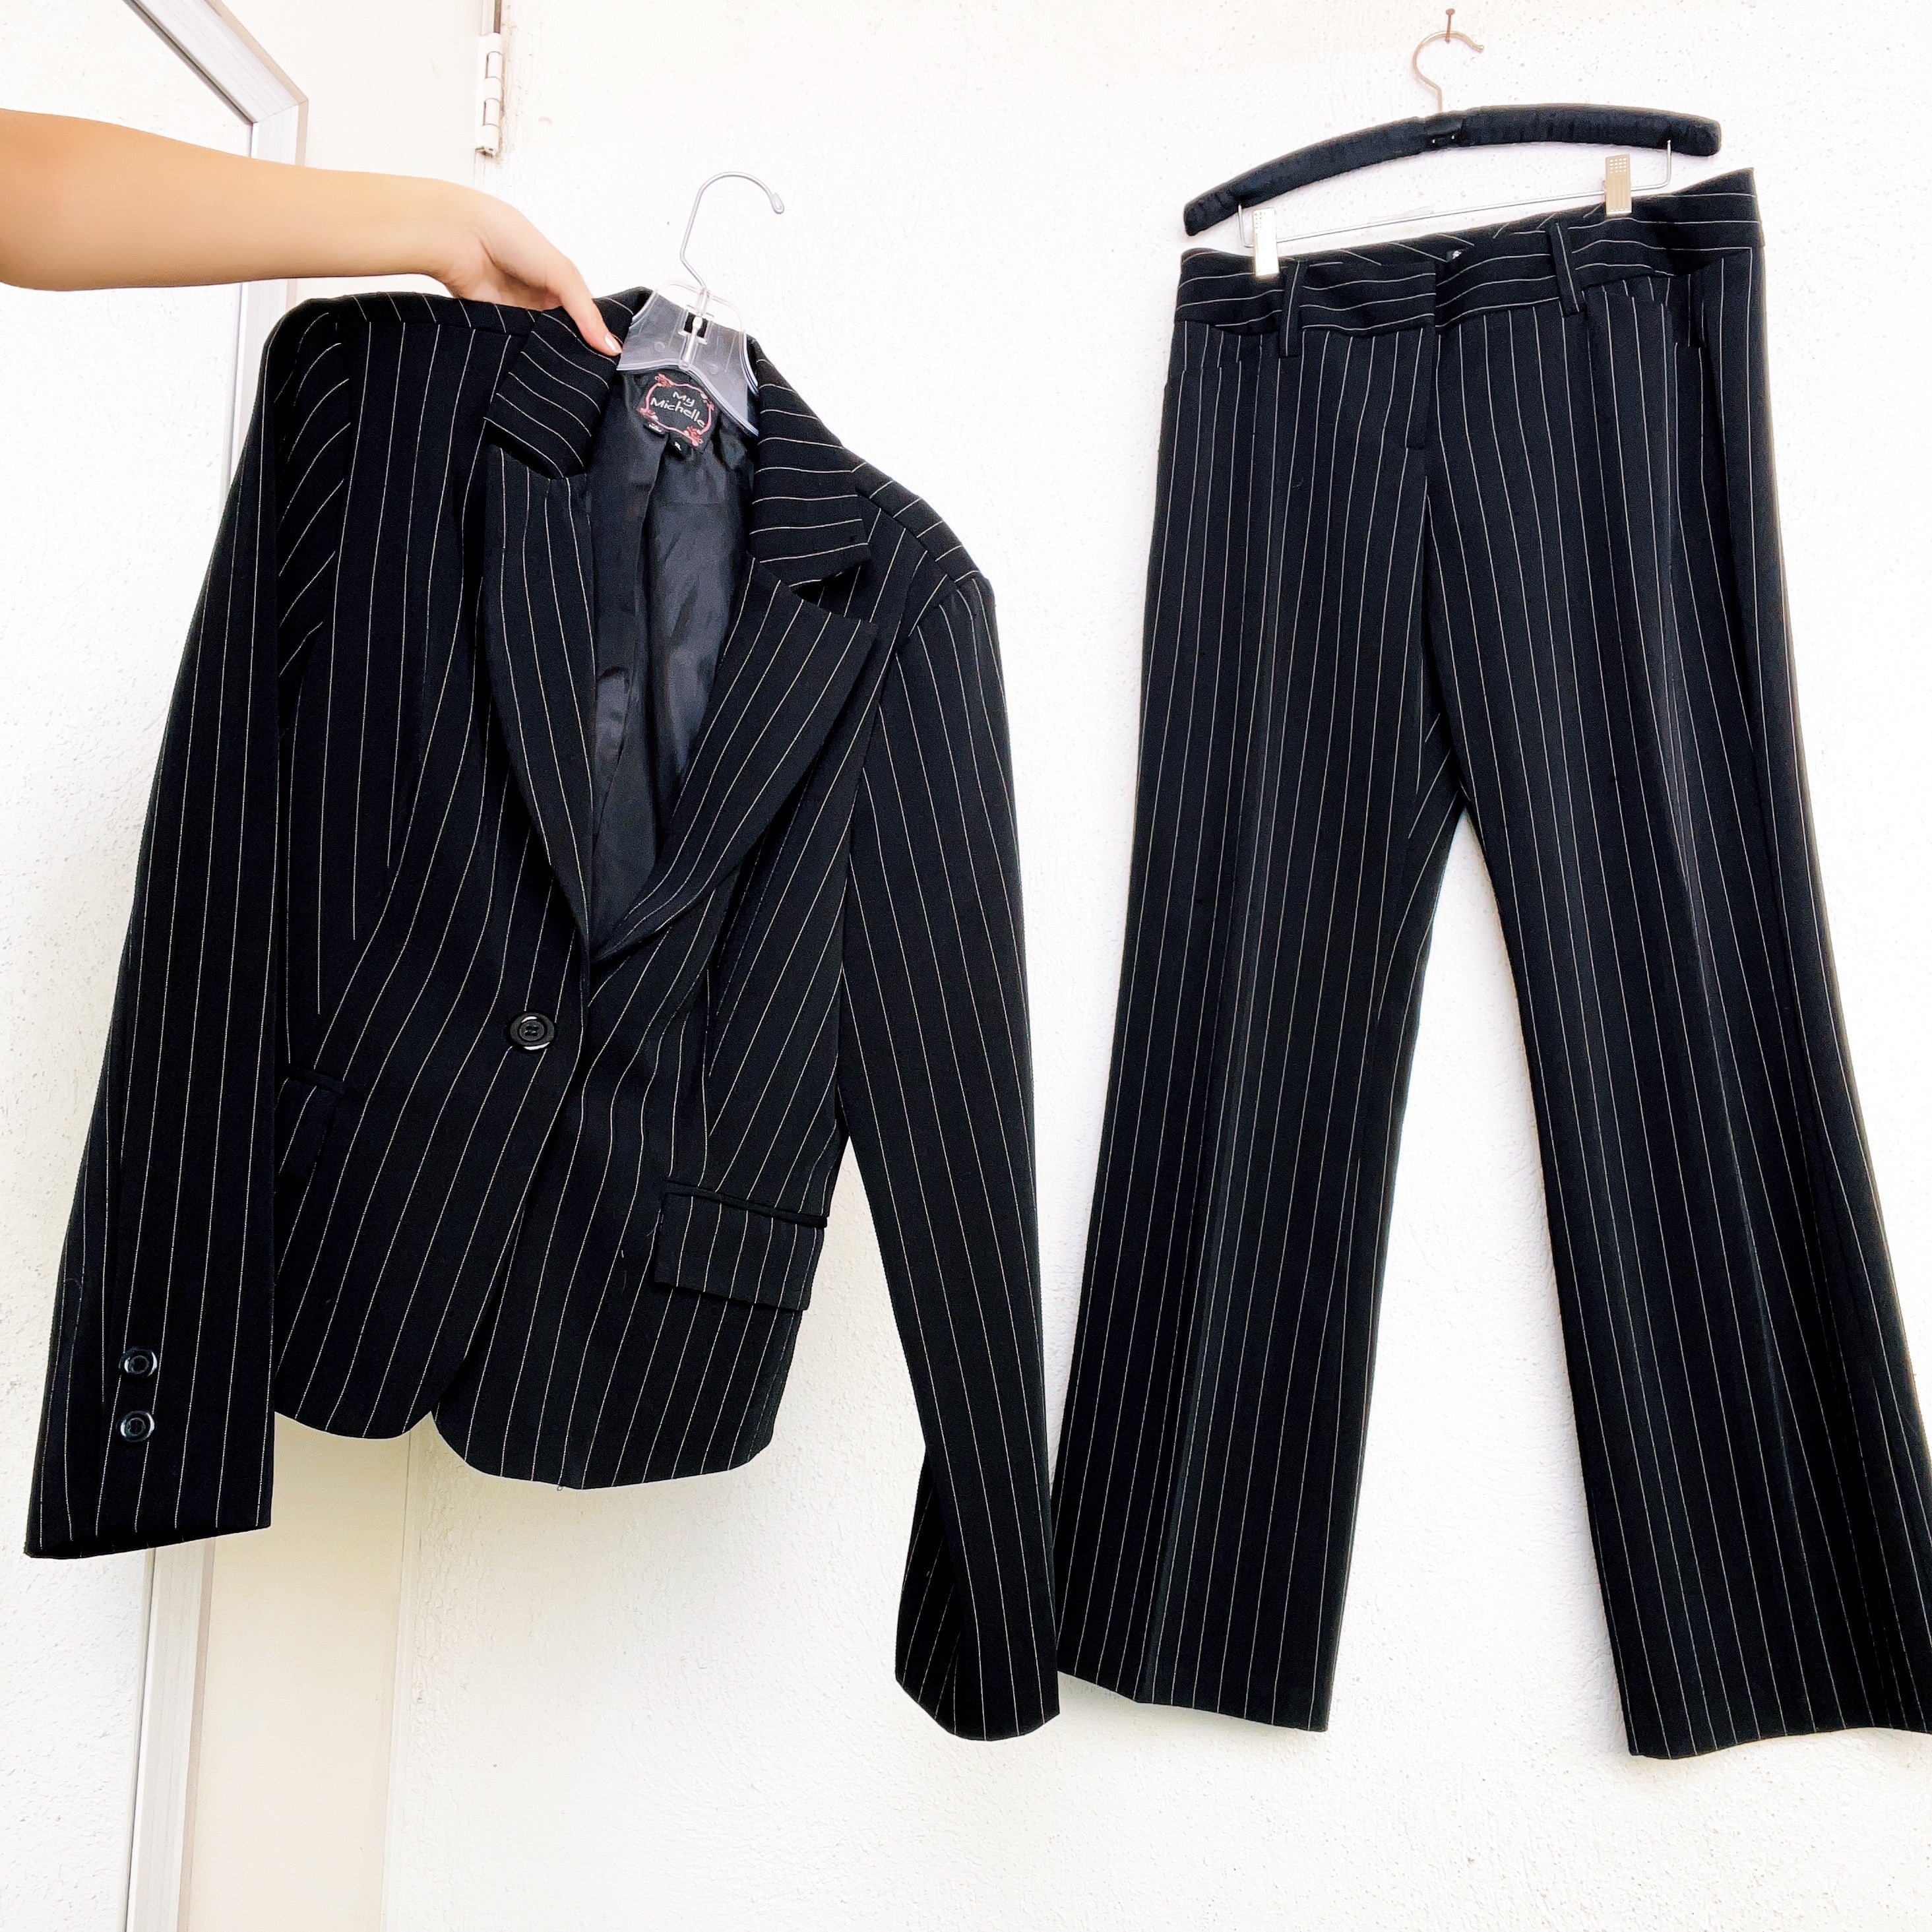 Early 2000s Black Pinstriped Pantsuit (M)